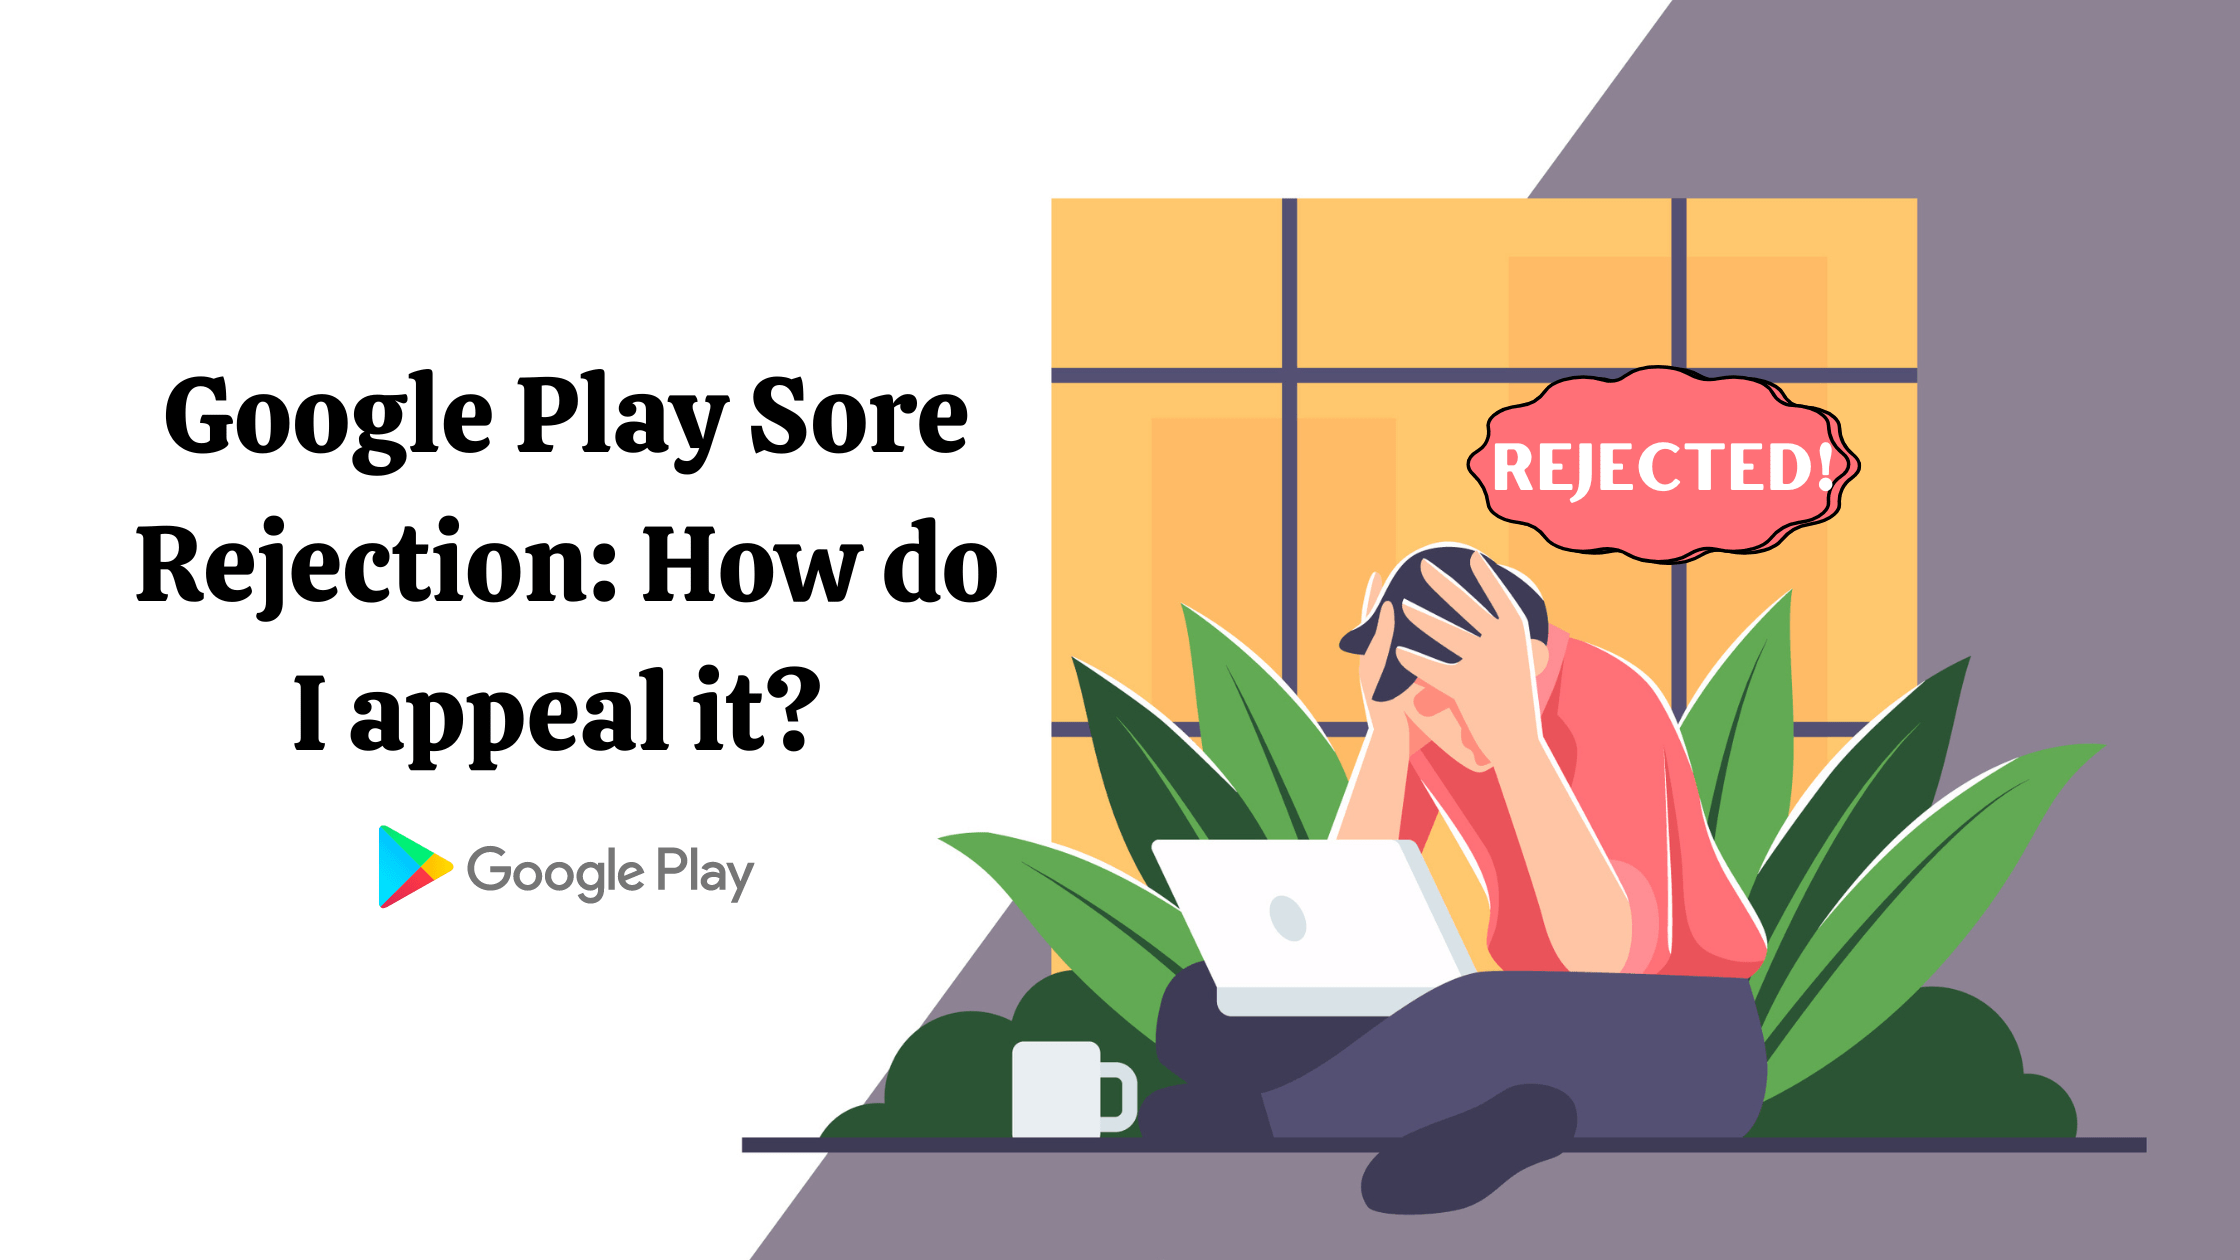 GOOGLE PLAYSTORE APPEAL